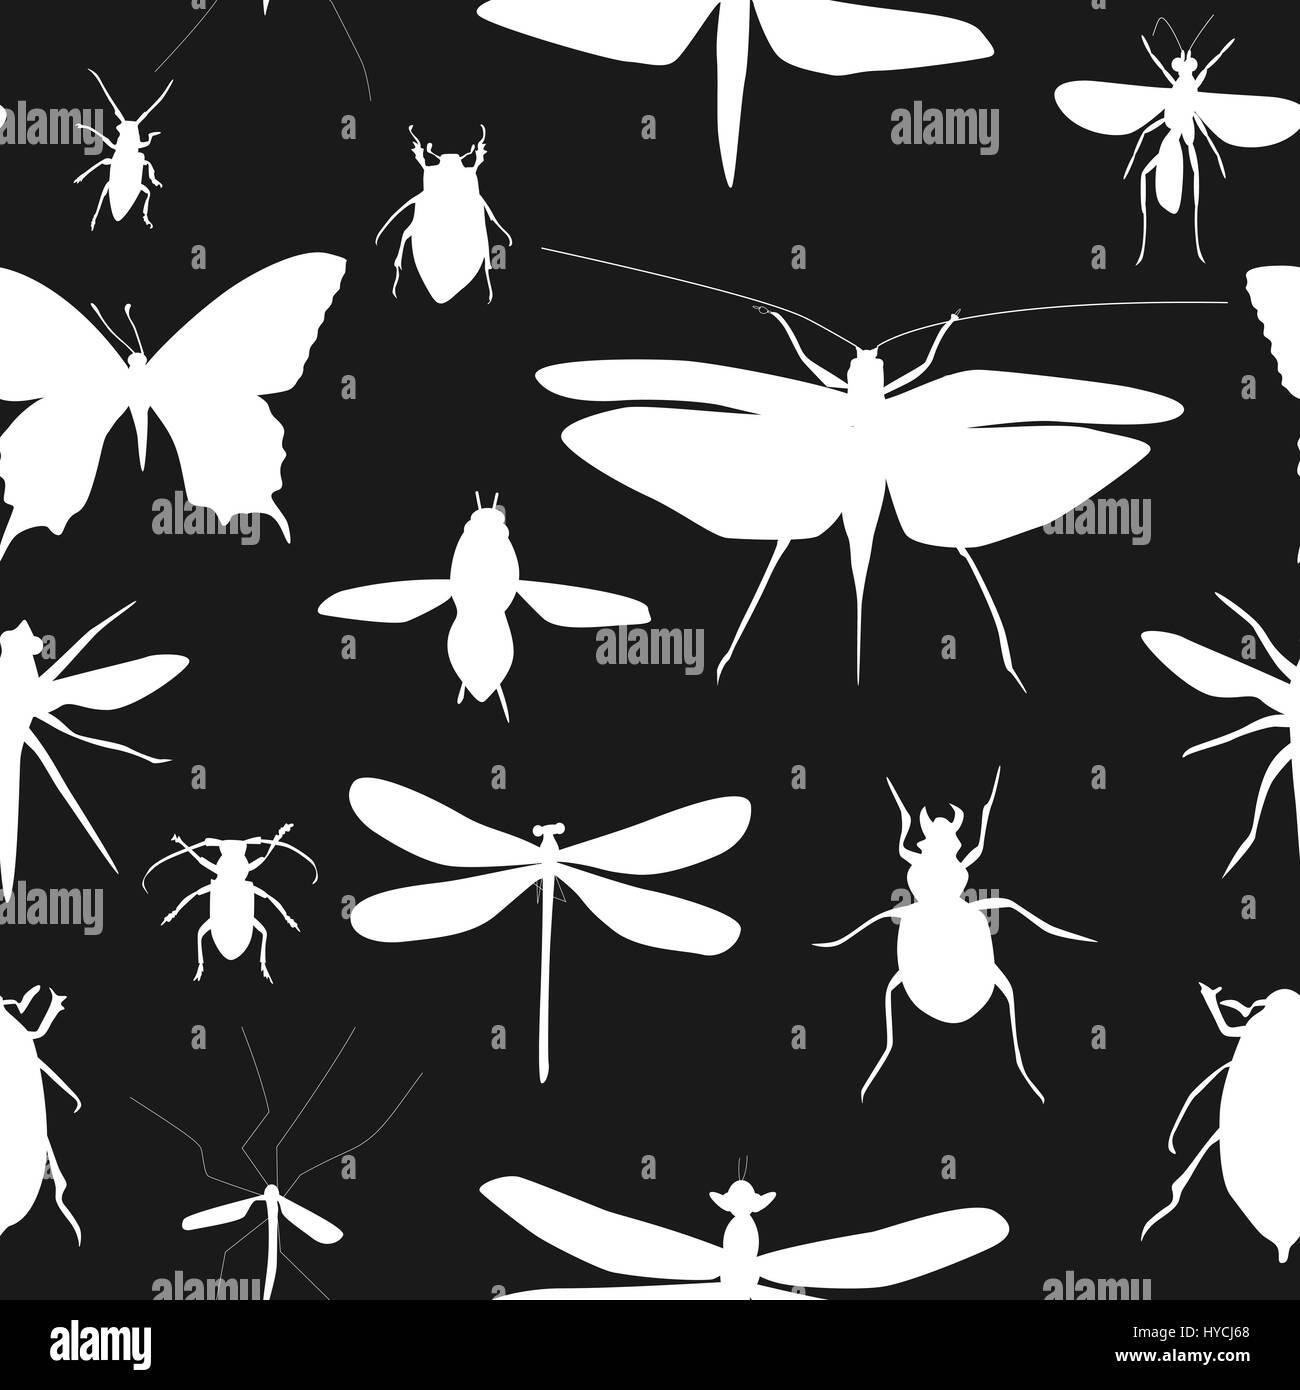 Silhouettes Set of Beetles, Dragonflies and Butterflies Seamless Stock Vector